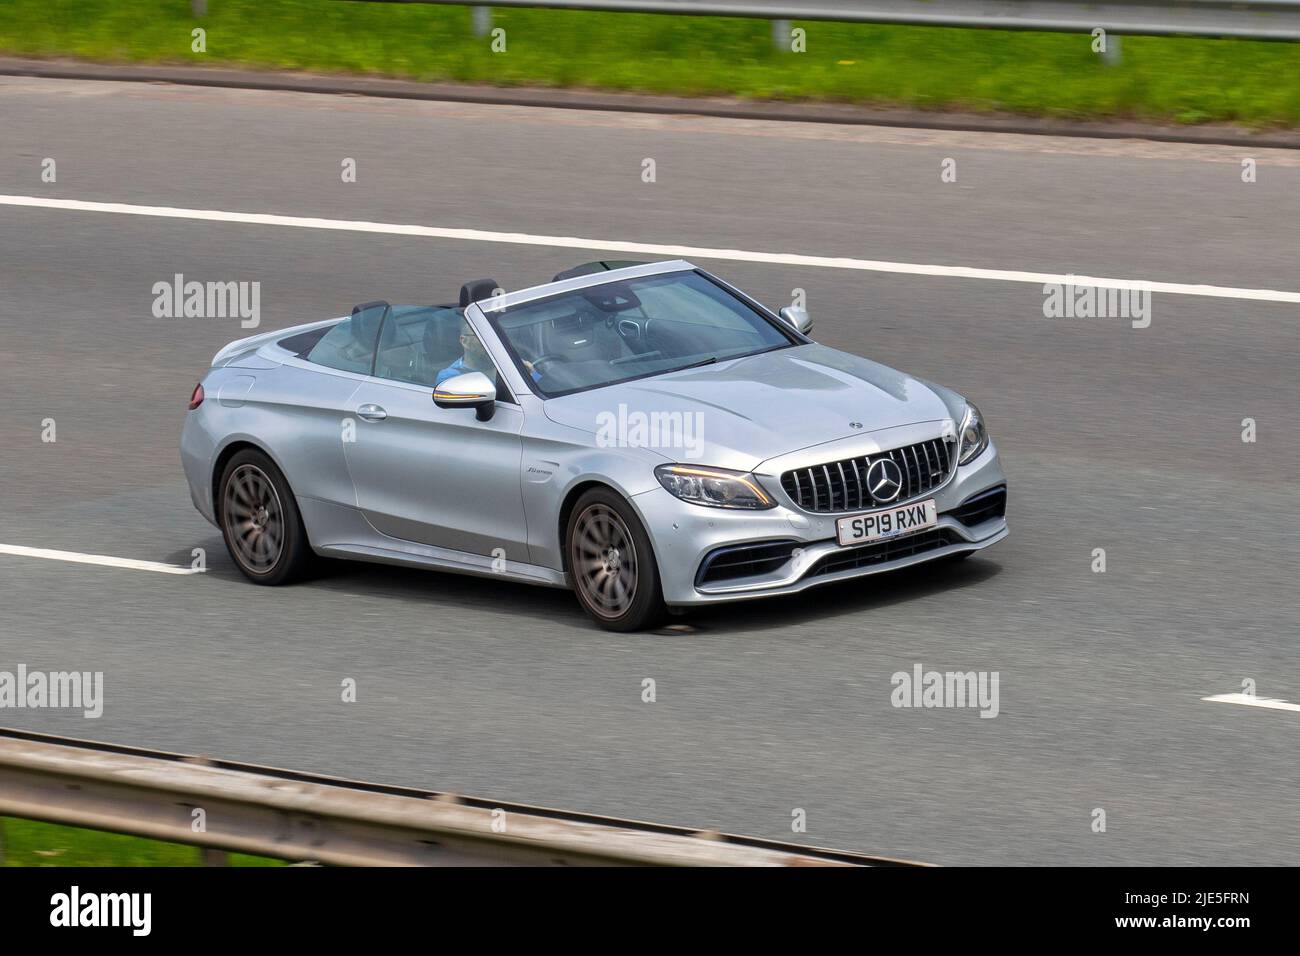 2019 silver Mercedes Benz 3982cc petrol Cabrio, Amg C 63 Auto C63 Speedshift MCT Auto start-stop cabriolet;  traveling on the M6 motorway, UK Stock Photo